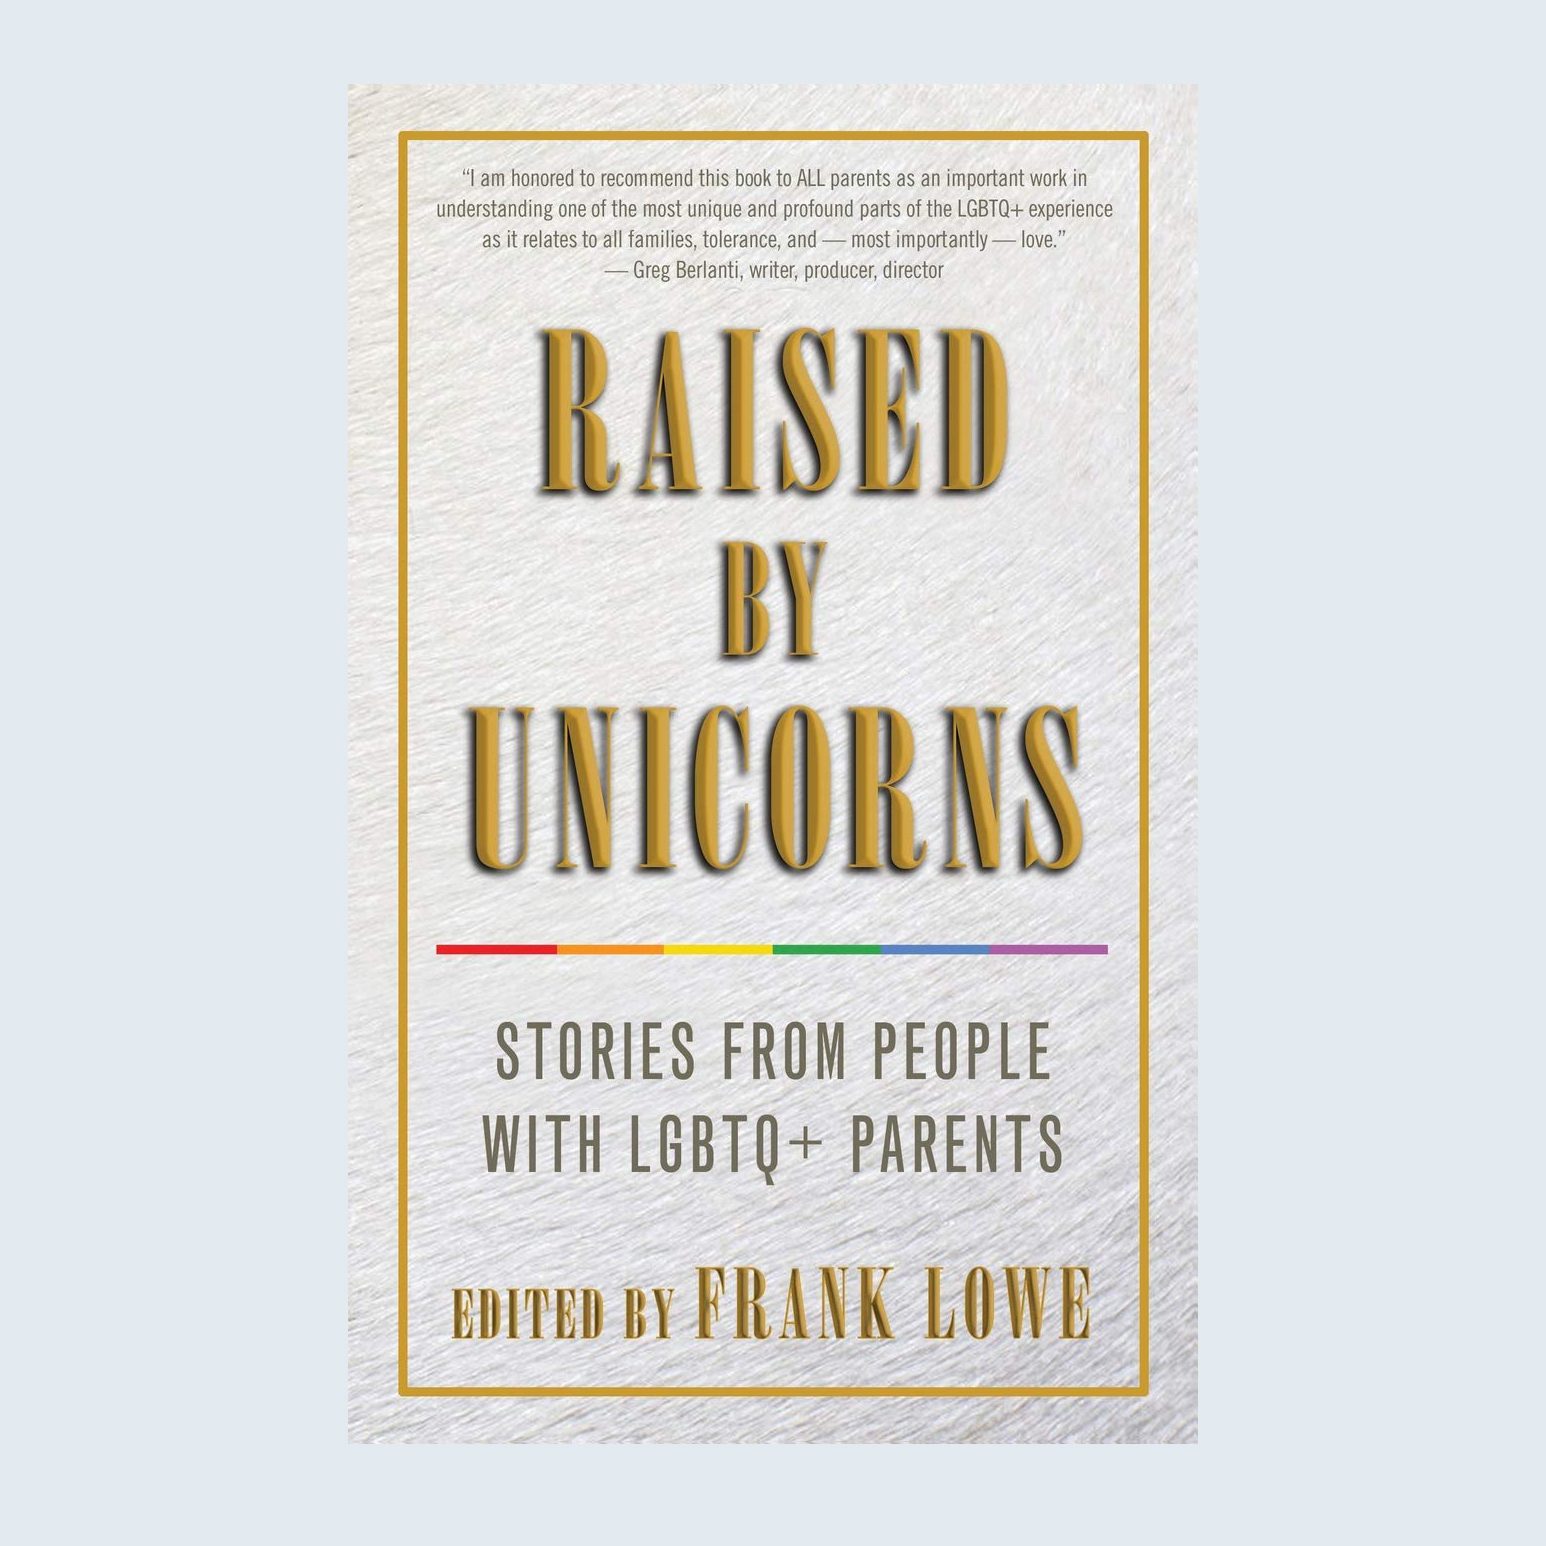 Raised by Unicorns: Stories from People with LGBTQ+ Parents by Frank Lowe